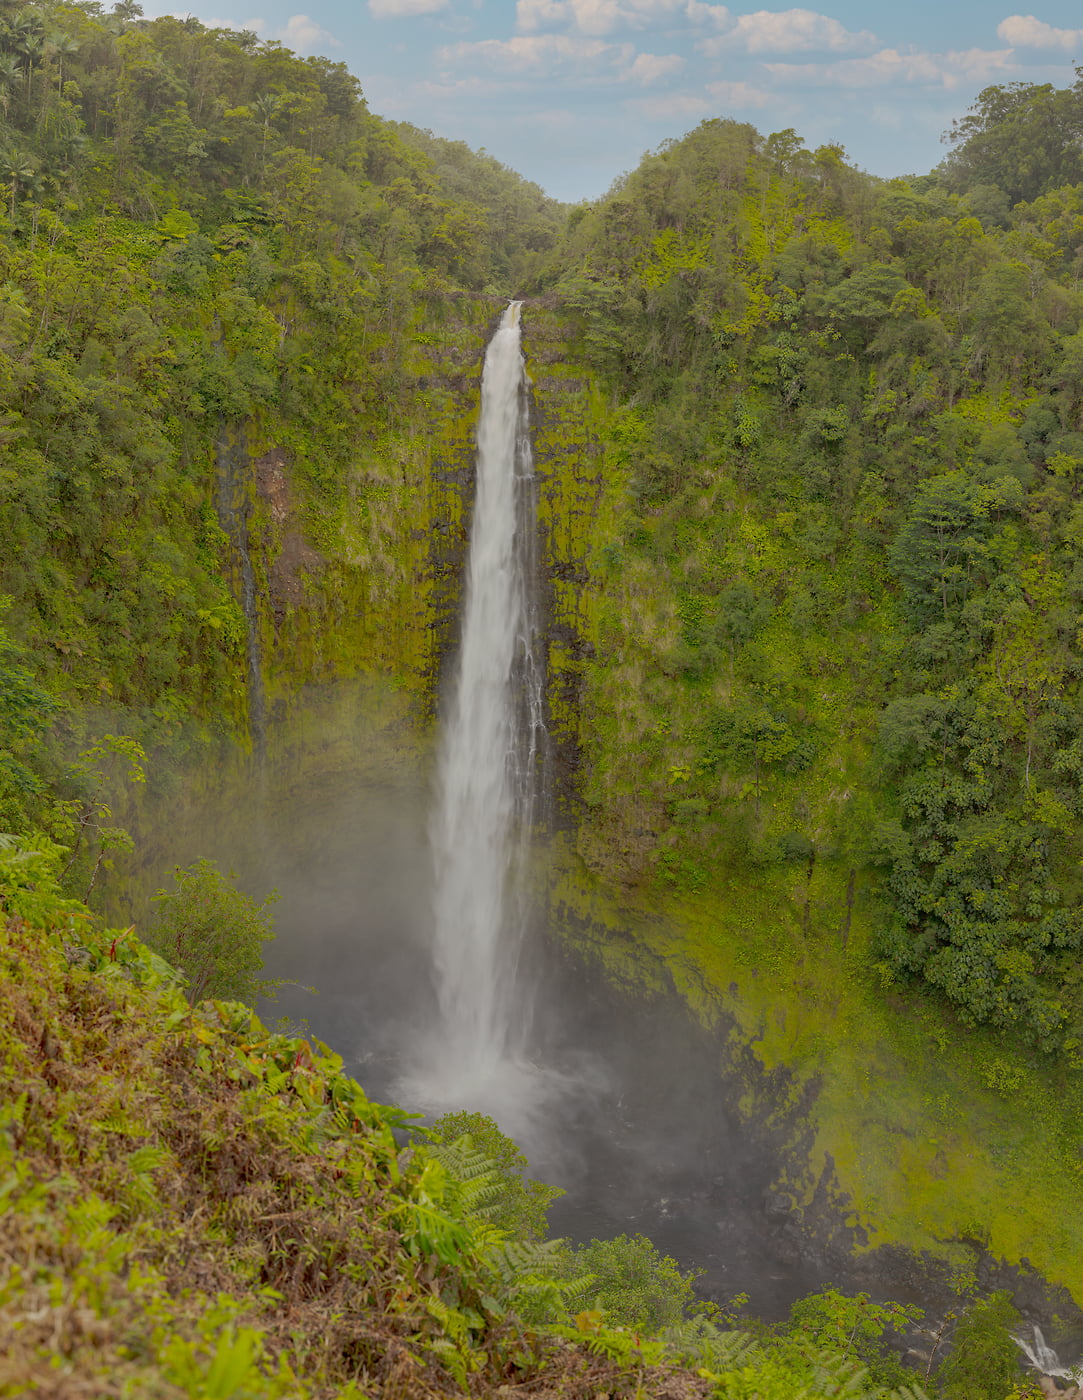 548 megapixels! A very high resolution, large-format VAST photo print of a waterfall surrounded by a lush jungle; nature photograph created by John Freeman in Akaka Falls State Park, Big Island, Hawaii